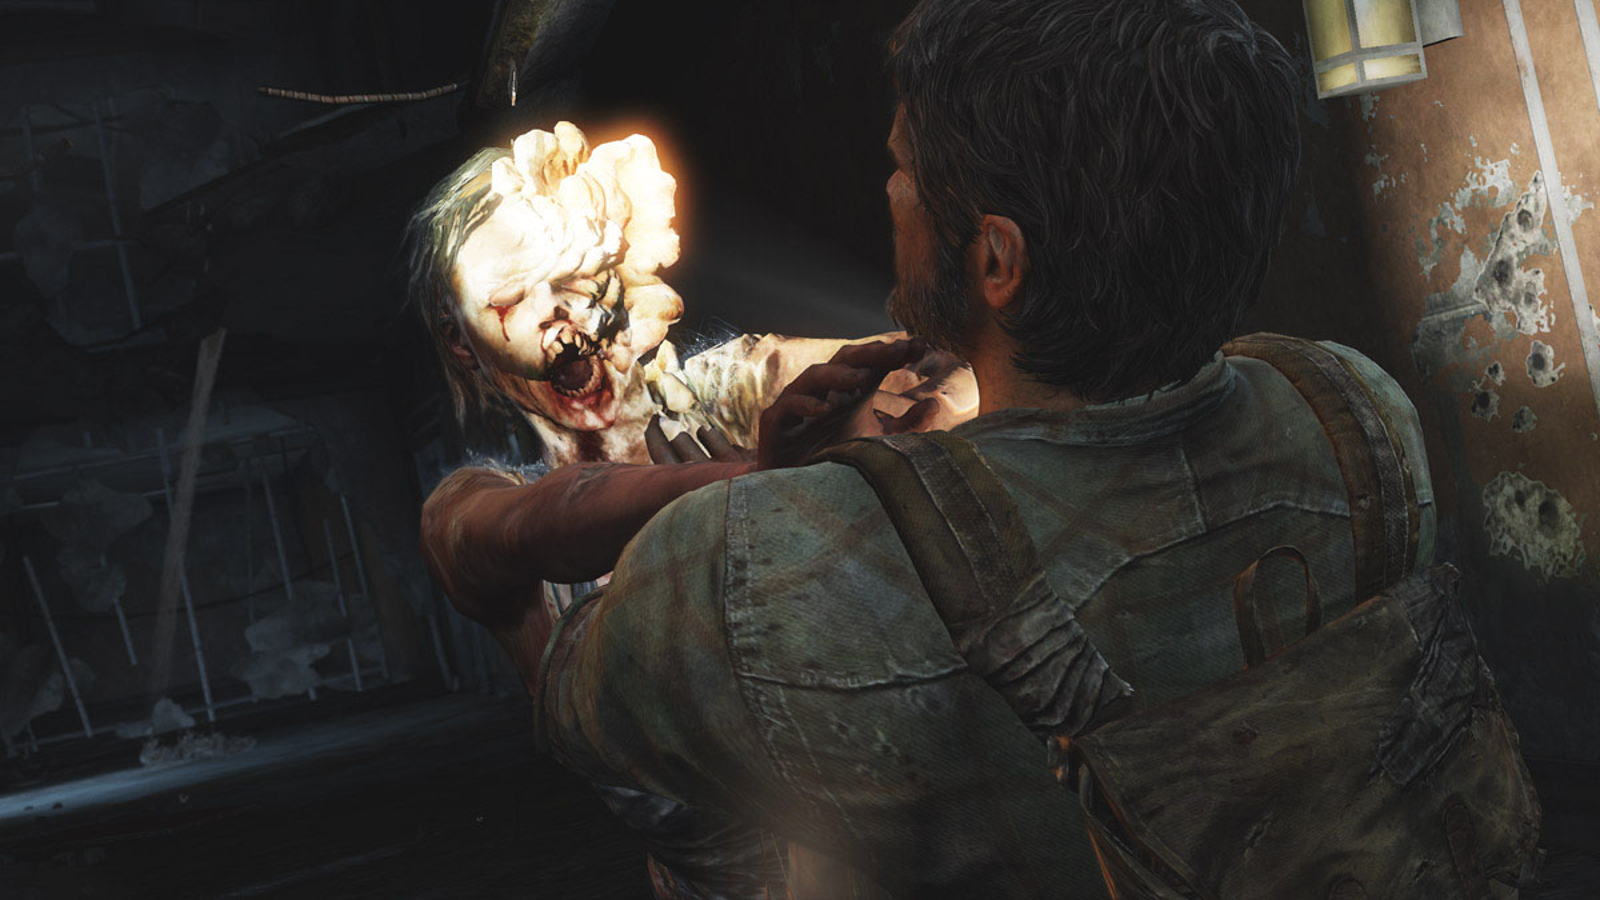 The last of us part 2, ellie, post-apocalyptic, zombie games